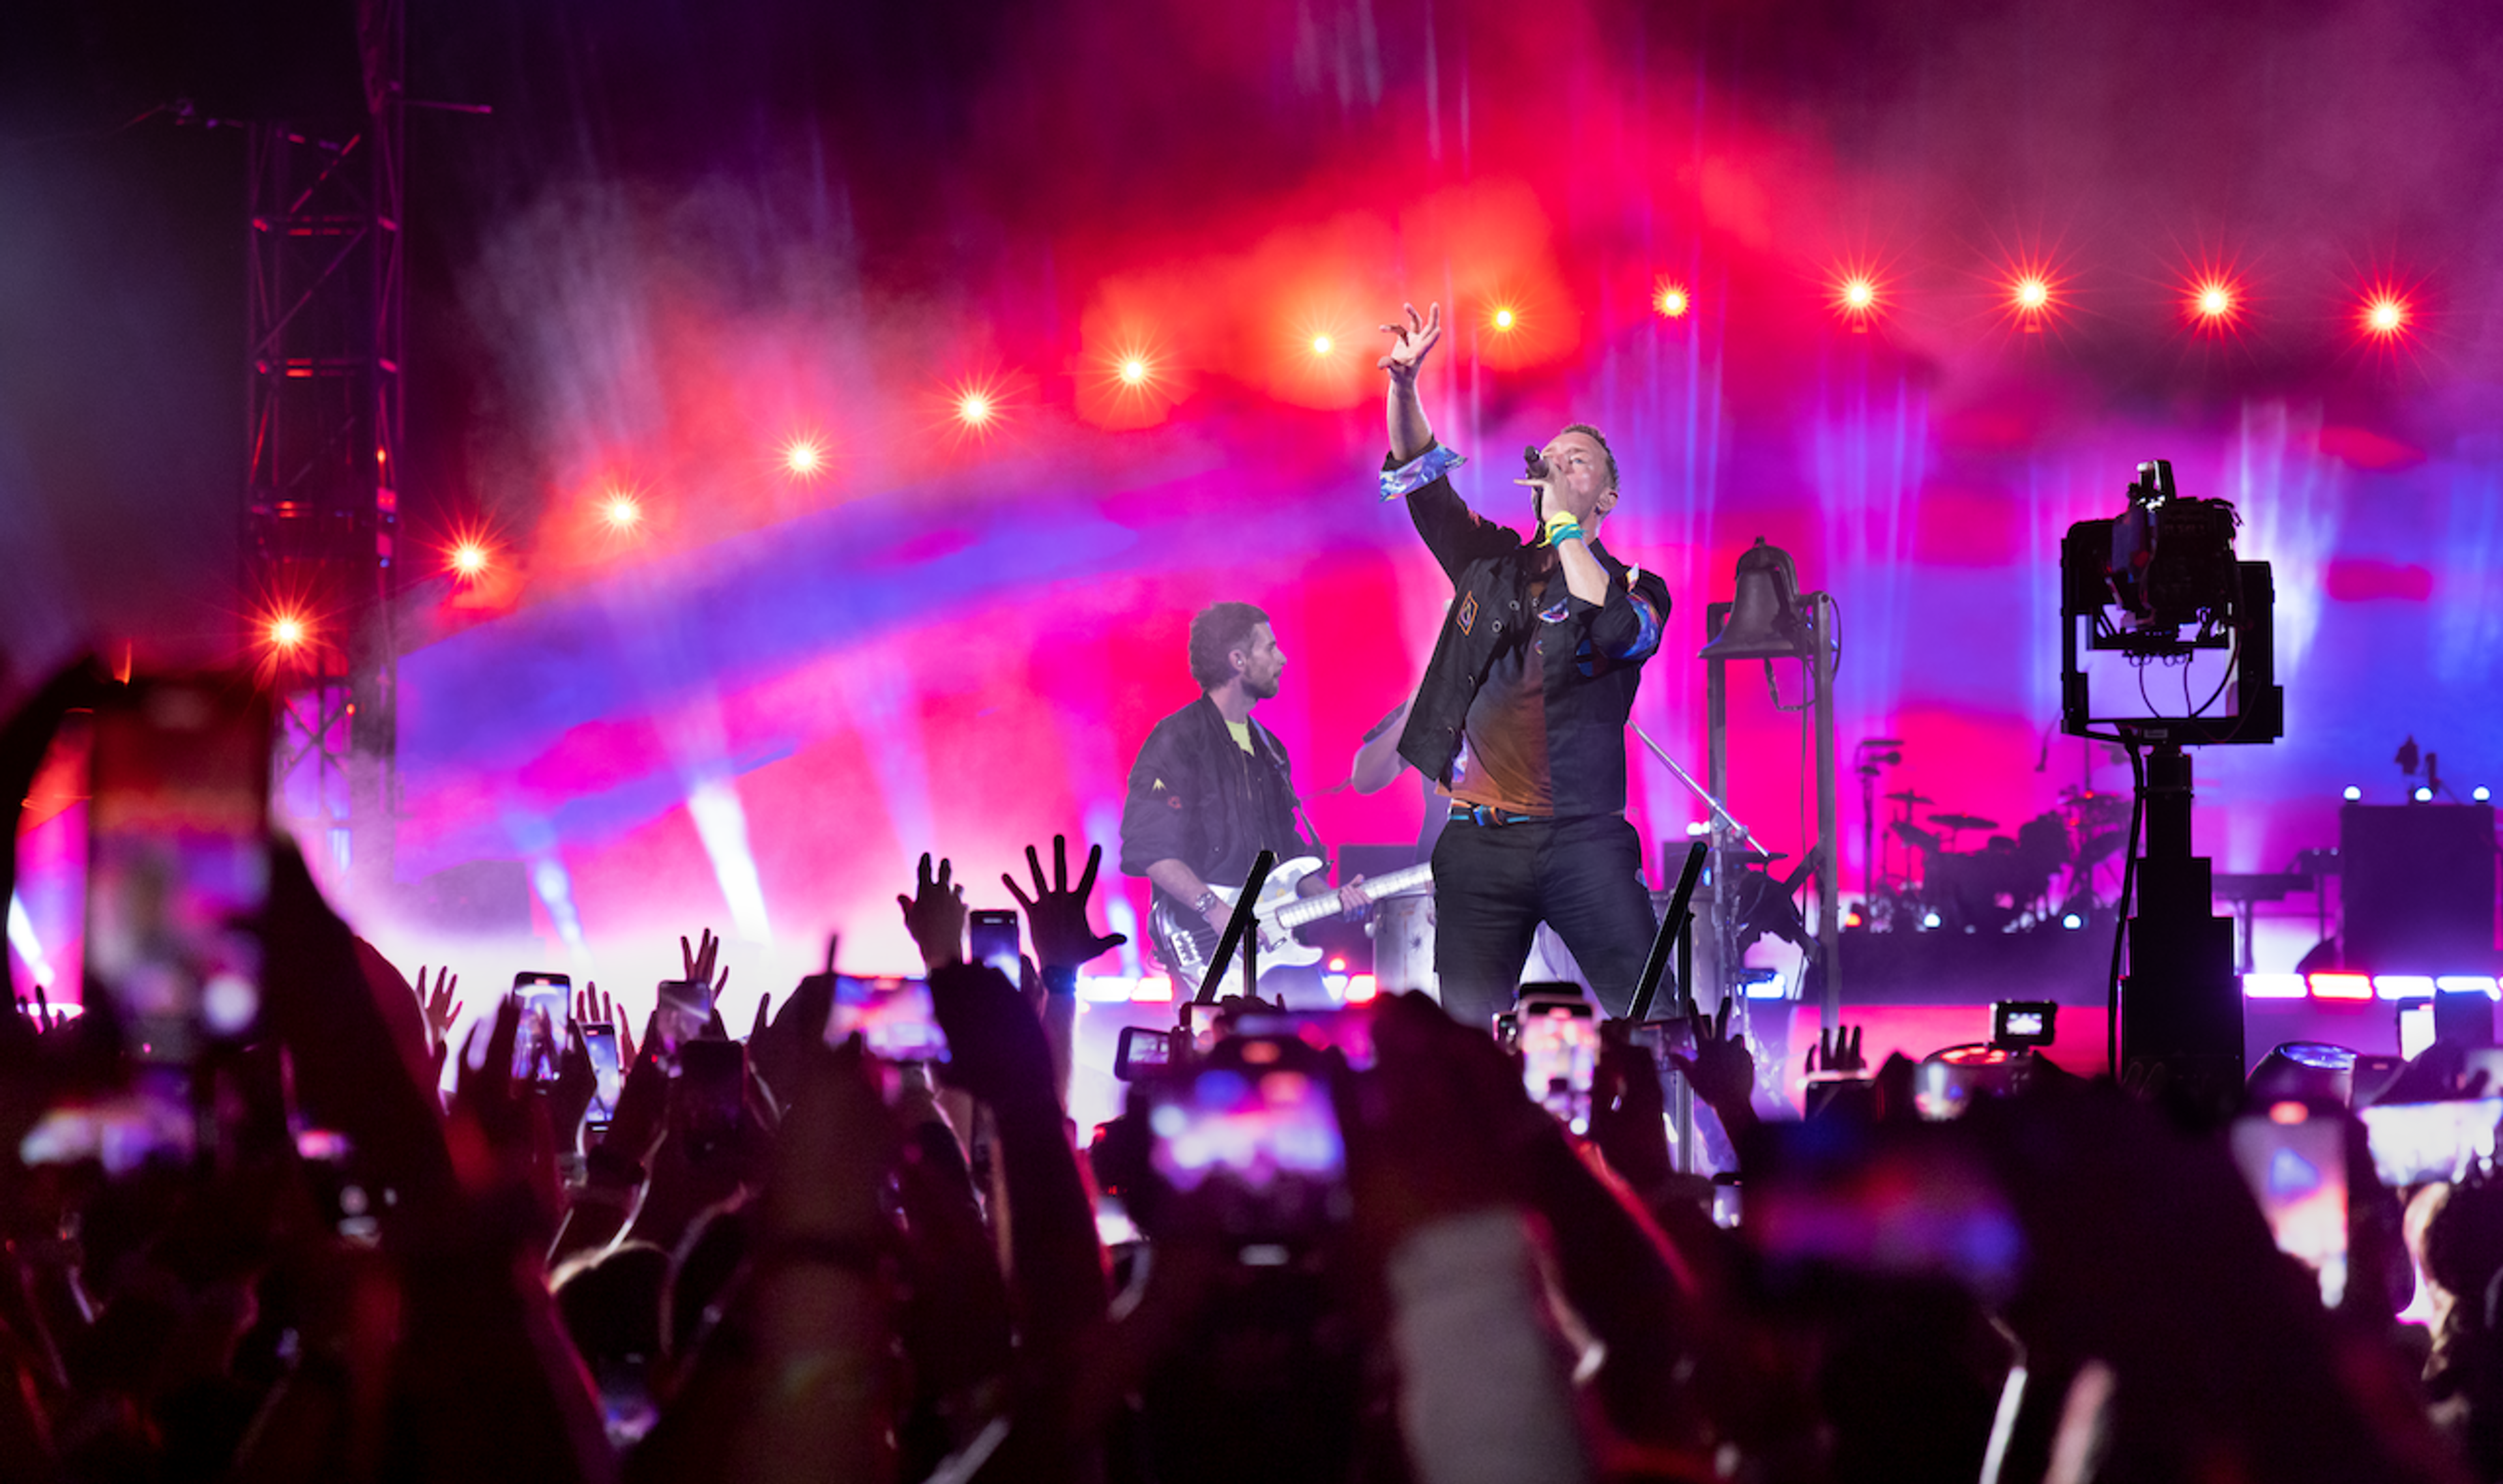 Coldplay performing in front of cheering crowd with pink and purple stage lights